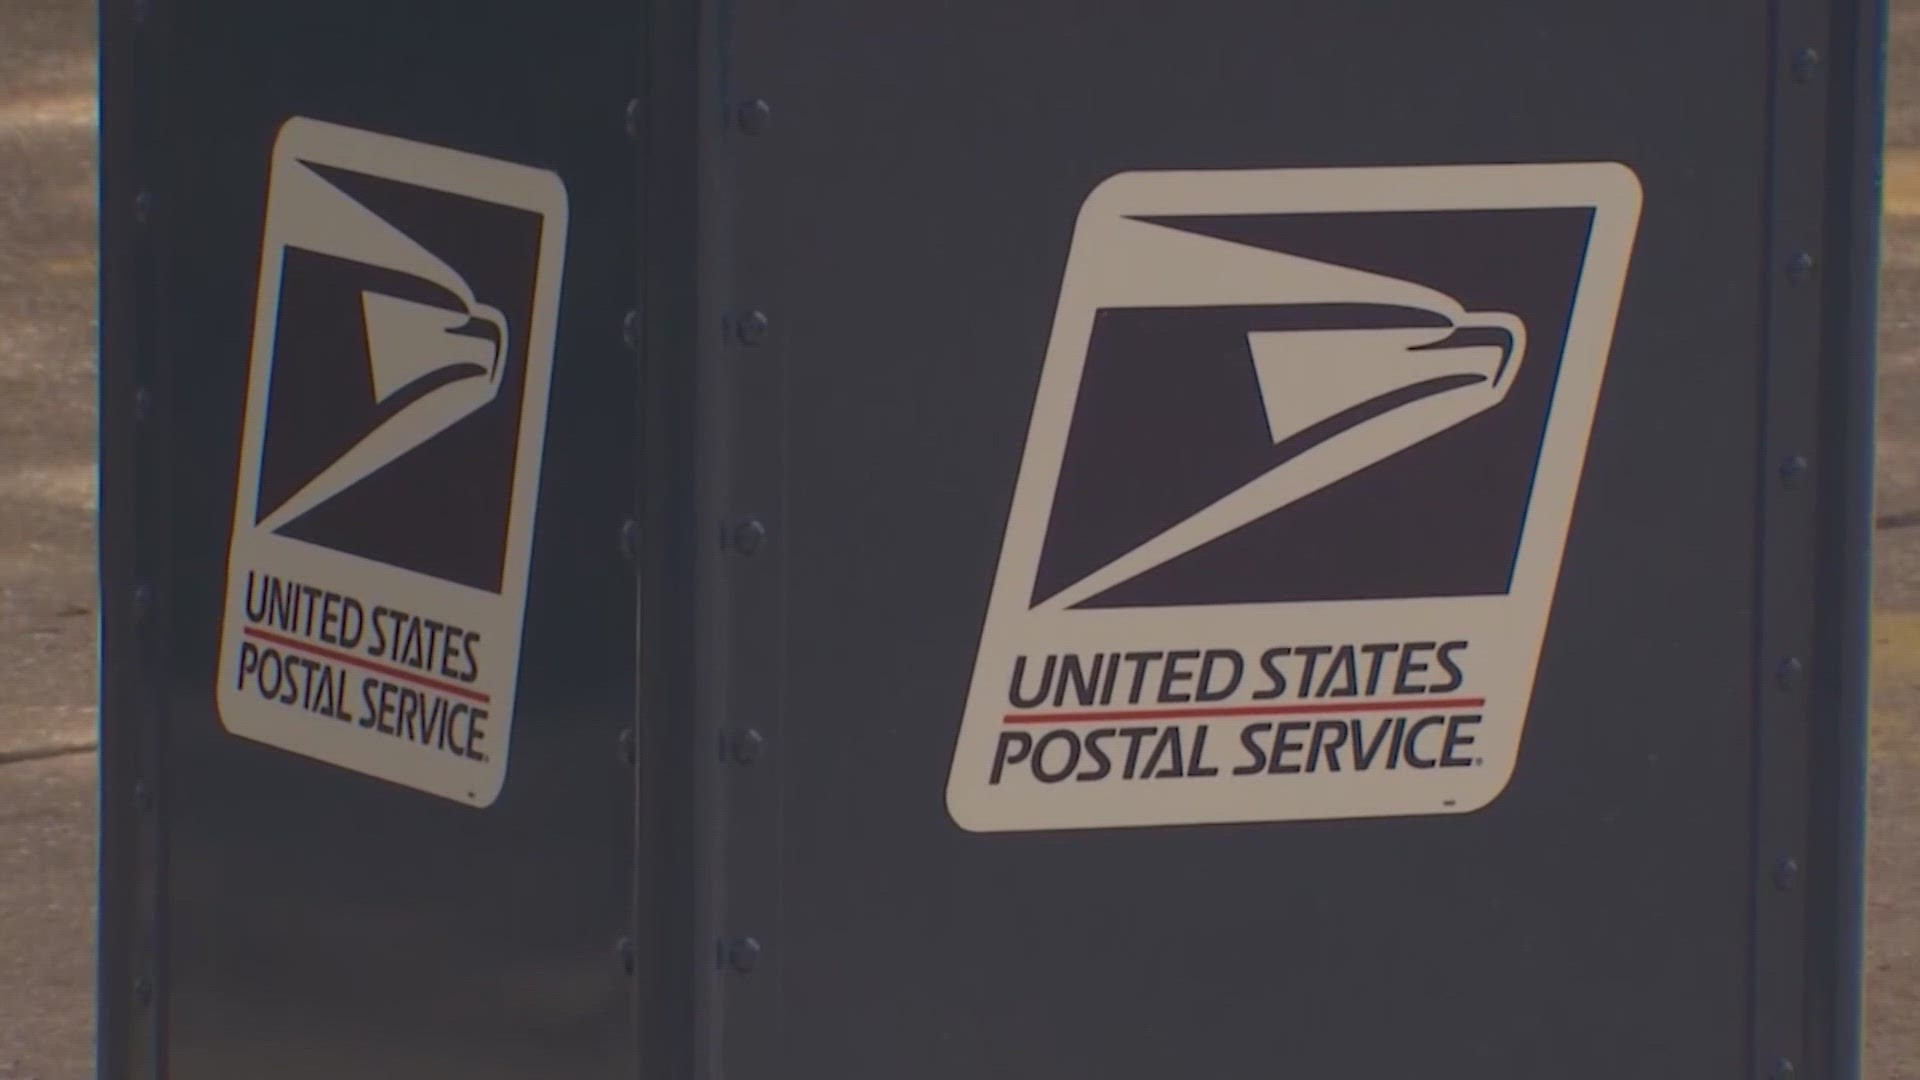 The hearing will examine USPS's current service, operations, and finances, including oversight of changes to the Postal Service’s network and impacts on delivery.